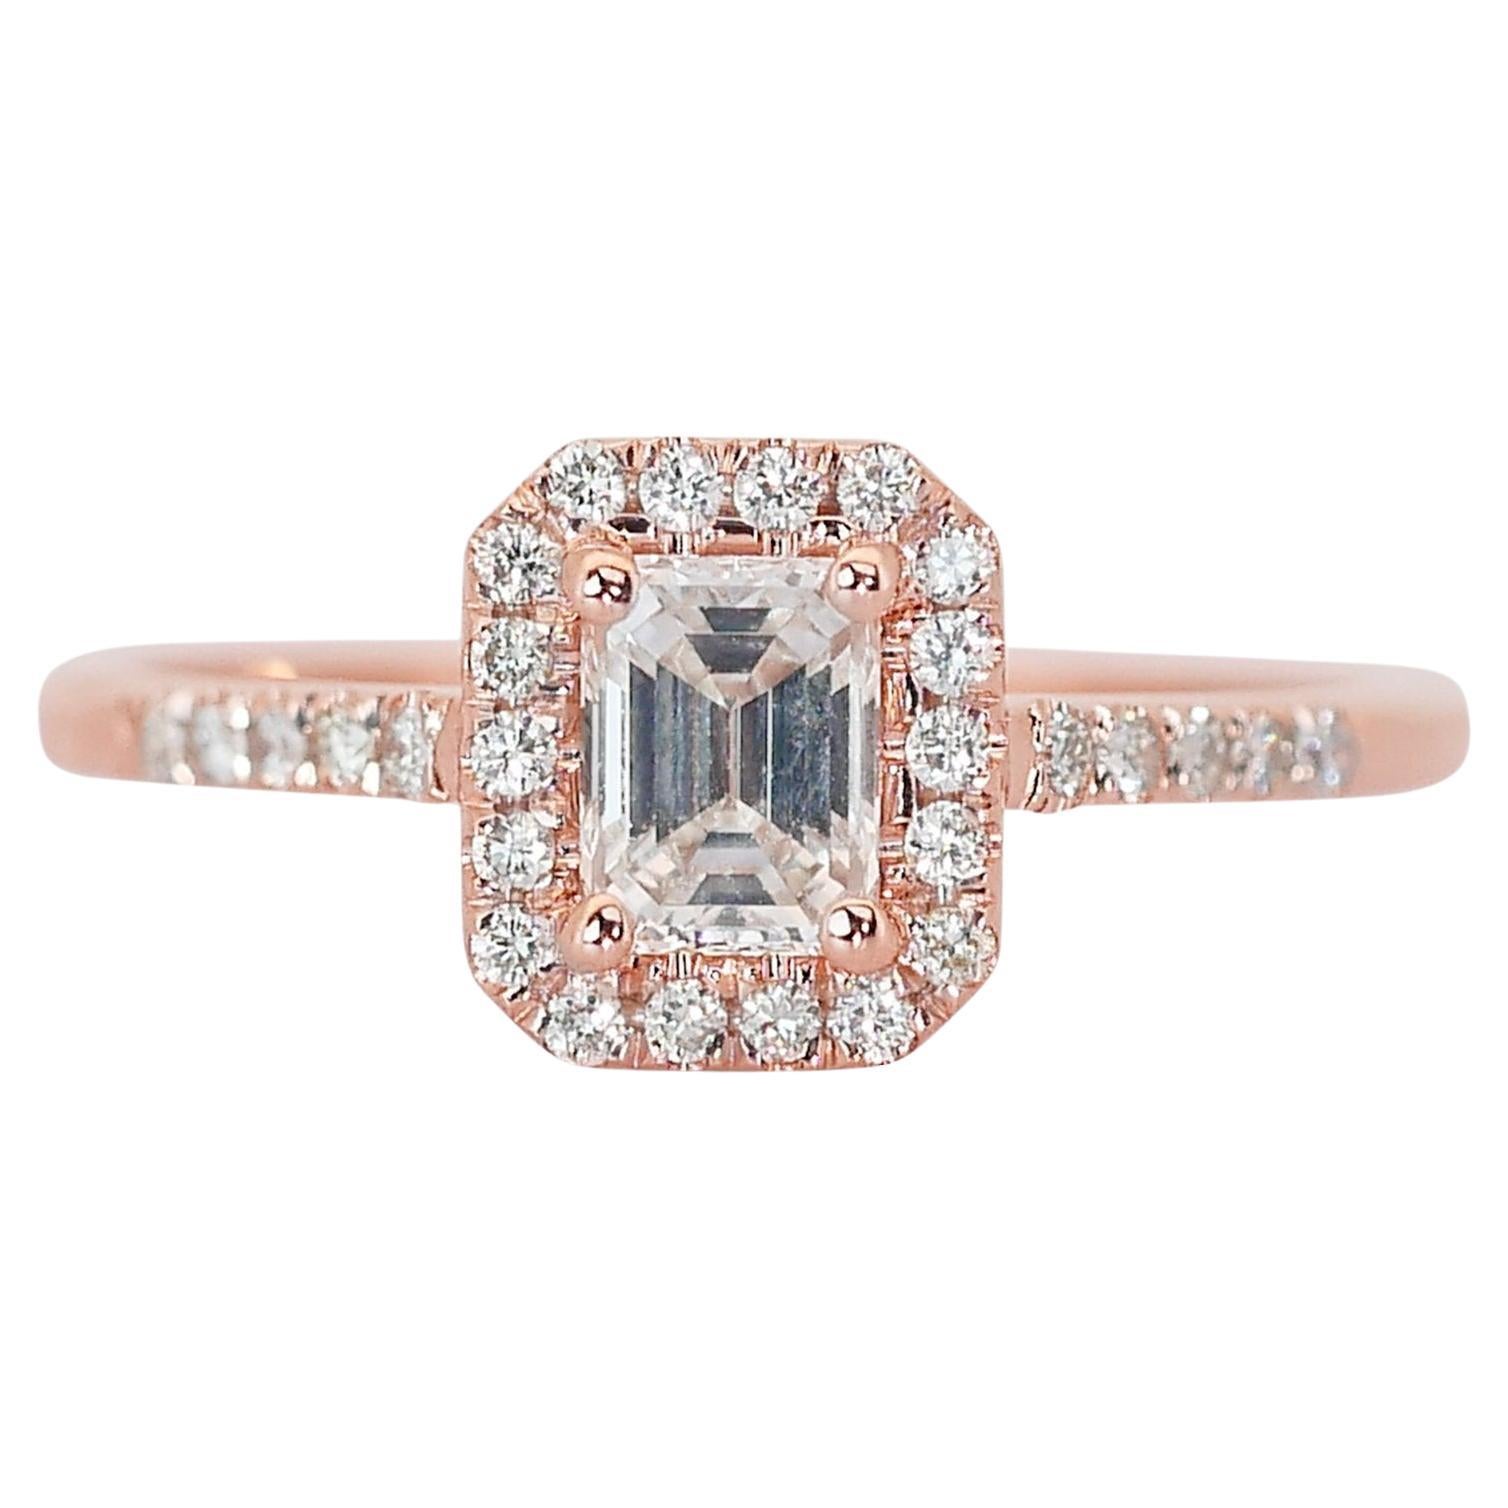 Captivating 0.90ct Diamonds Halo Ring in 18k Rose Gold - GIA Certified 